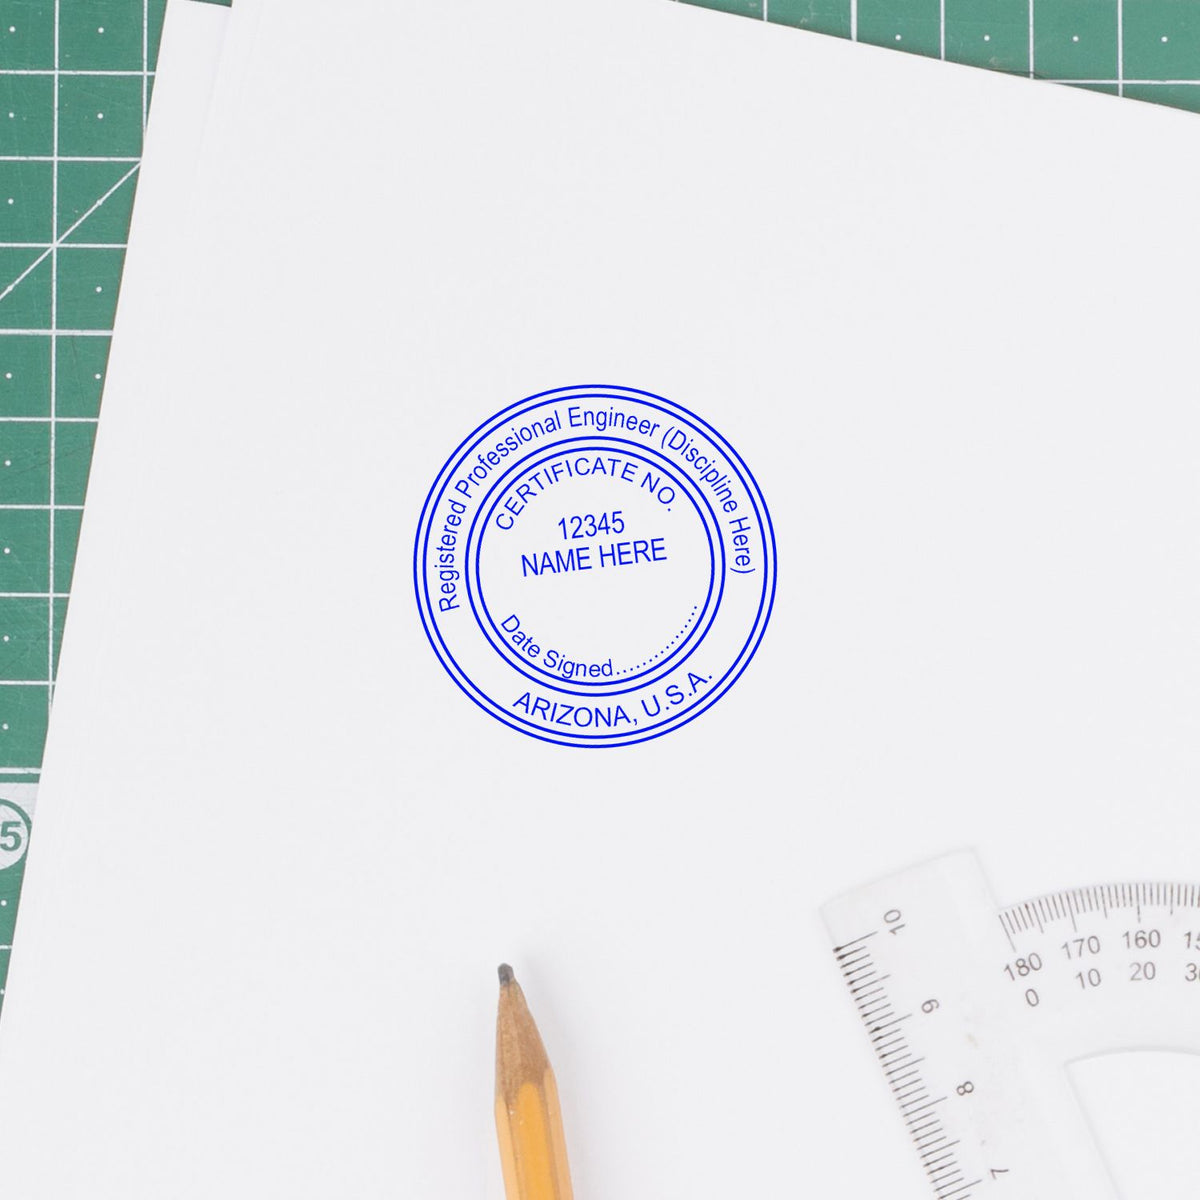 The Premium MaxLight Pre-Inked Arizona Engineering Stamp stamp impression comes to life with a crisp, detailed photo on paper - showcasing true professional quality.